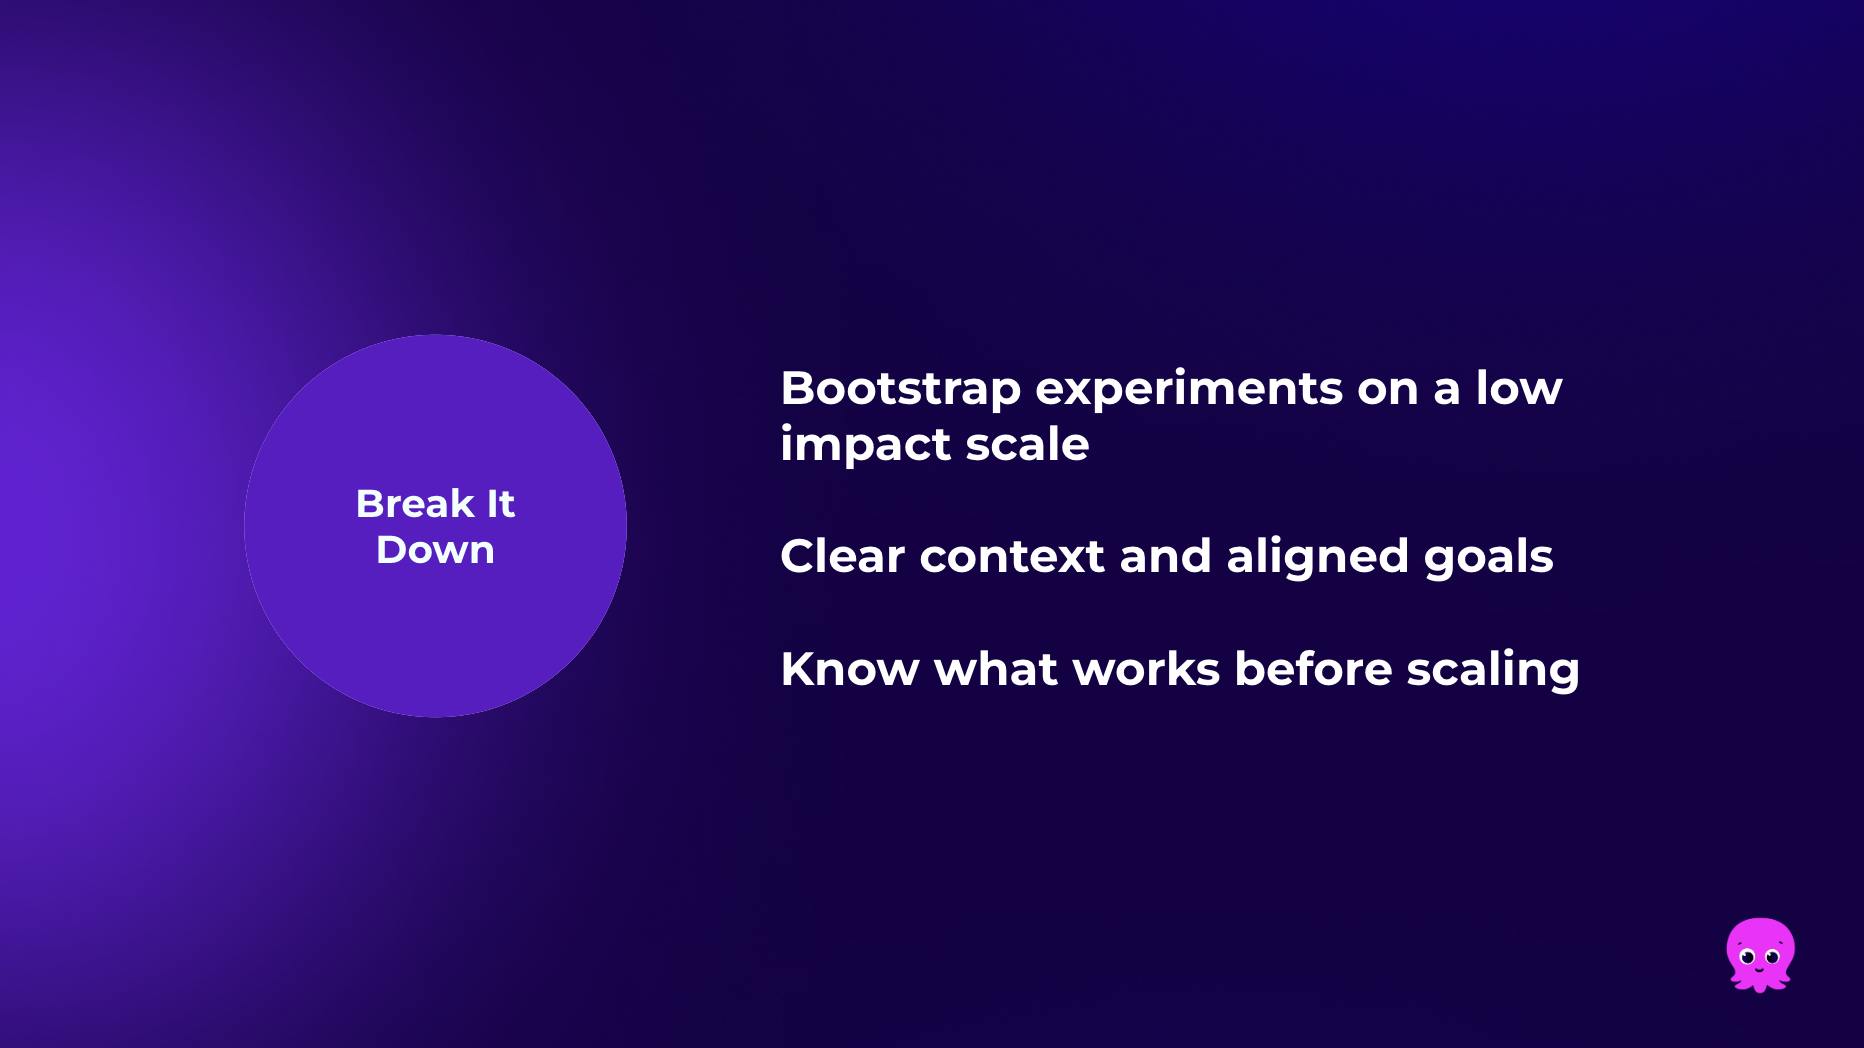 Break it down: Bootstrap experiments on a low impact scale, Clear context and aligned goals, Know what works before scaling